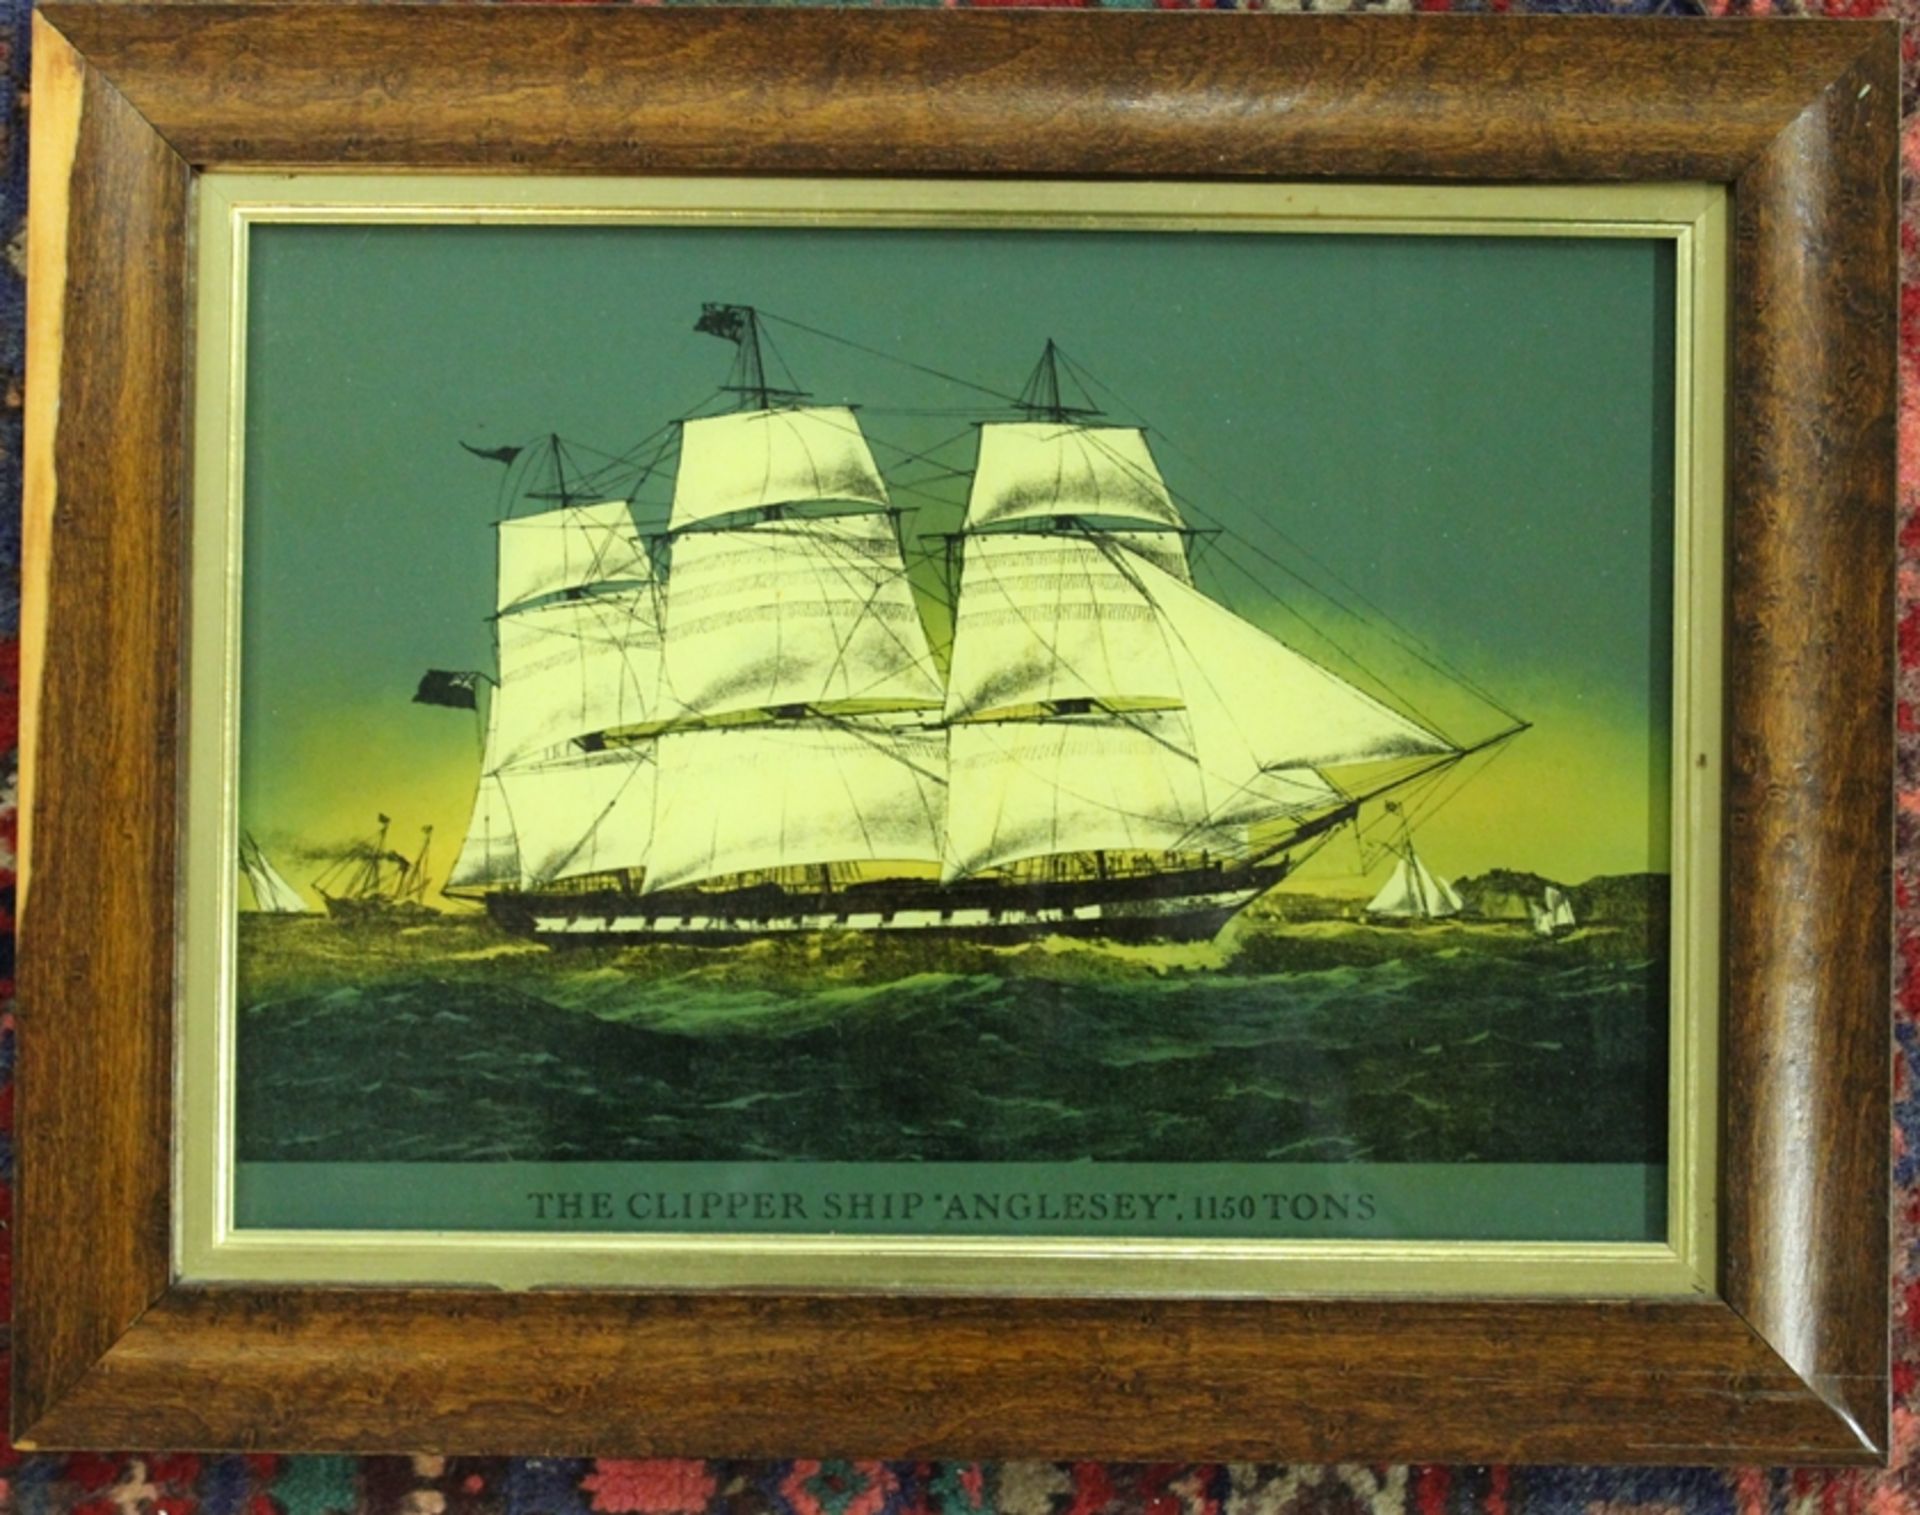 Hinterglasmalerei, The Clipper Ship "Anglesey", verso Etikette "Genuine Glass Painting, Imperial Cr - Image 2 of 3